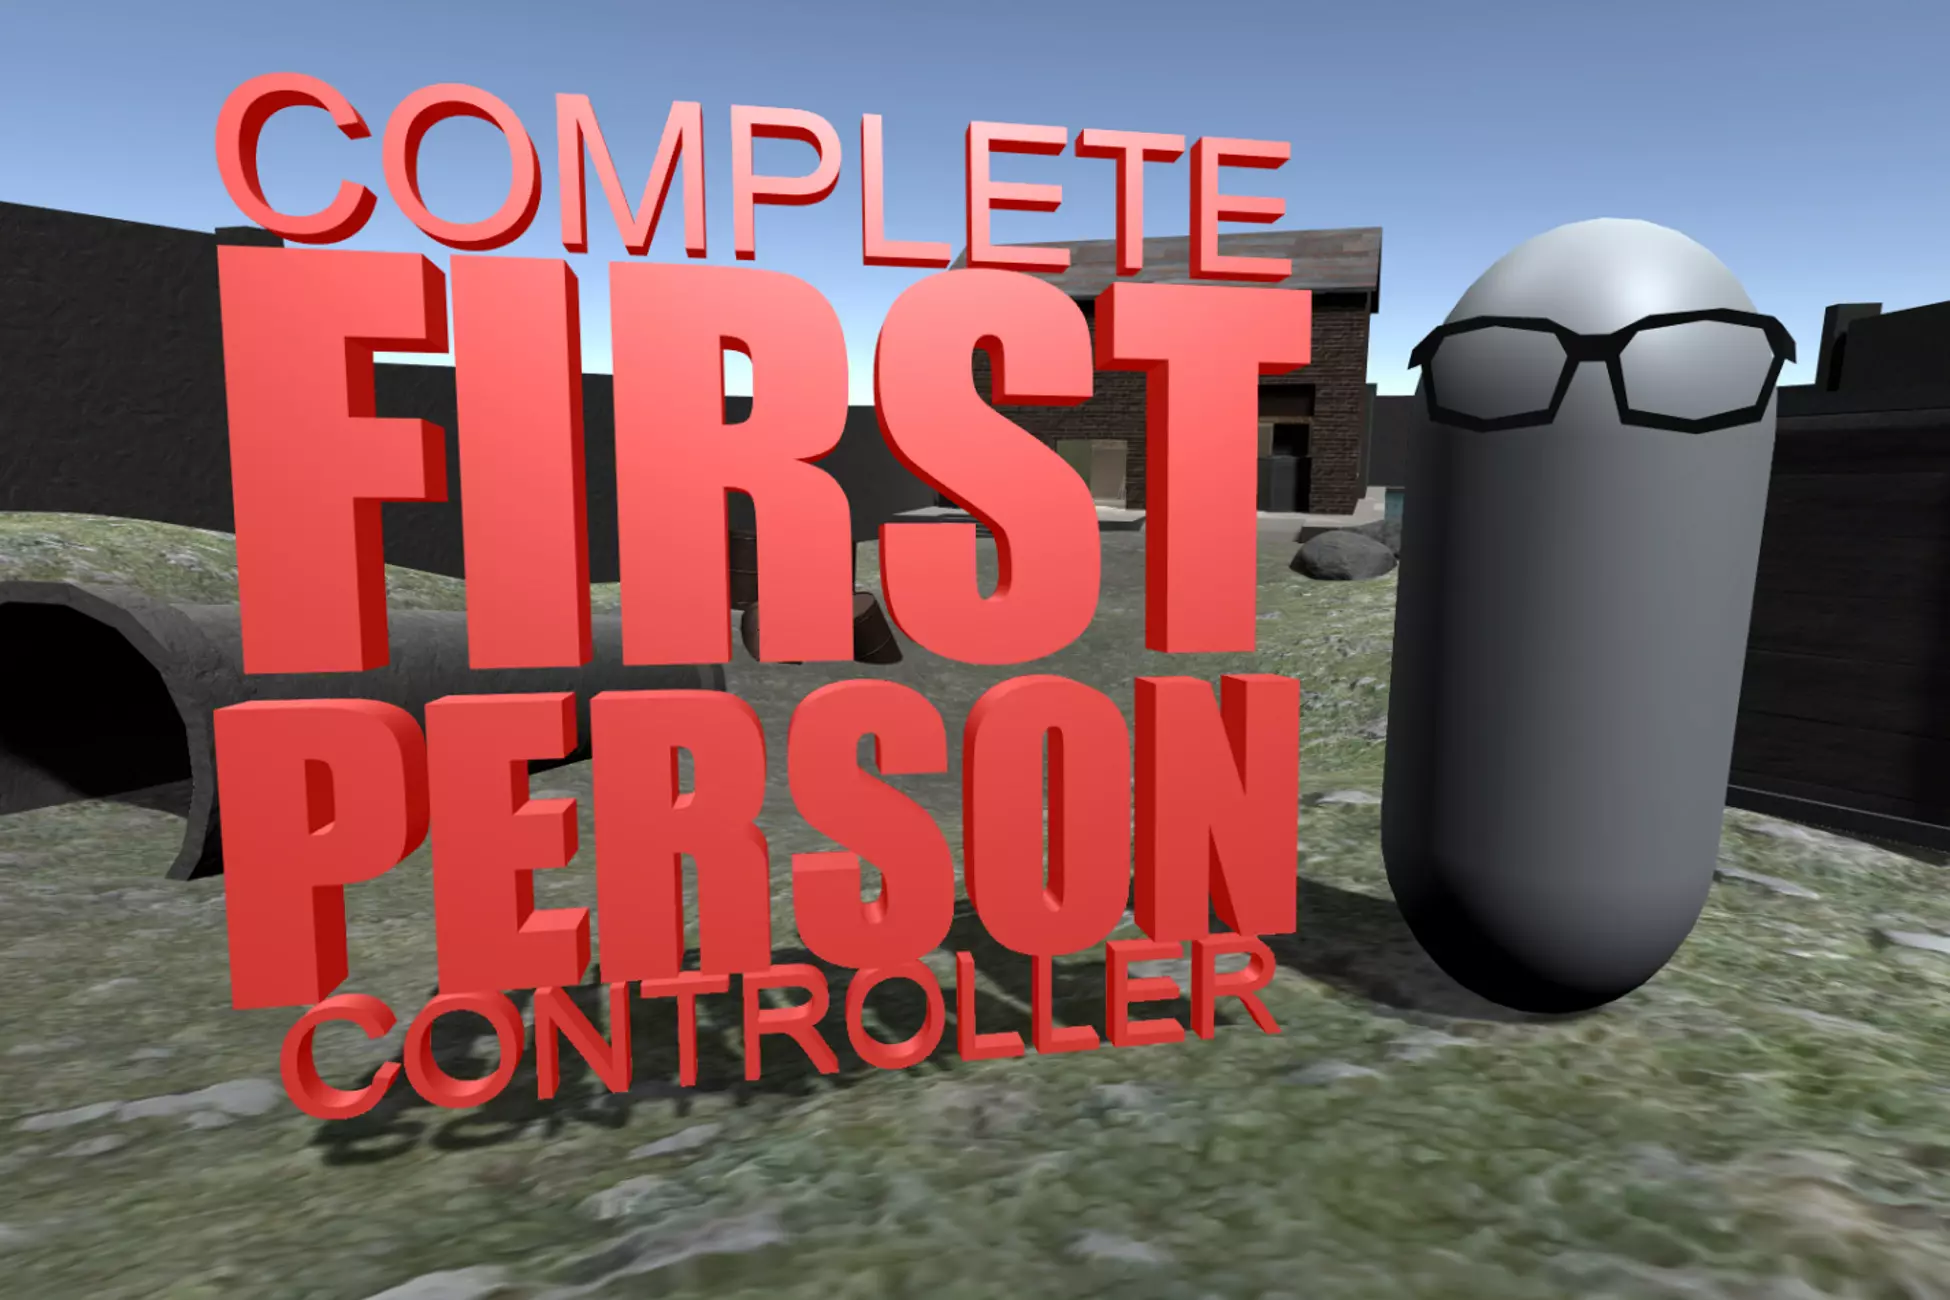 Complete FPS Controller